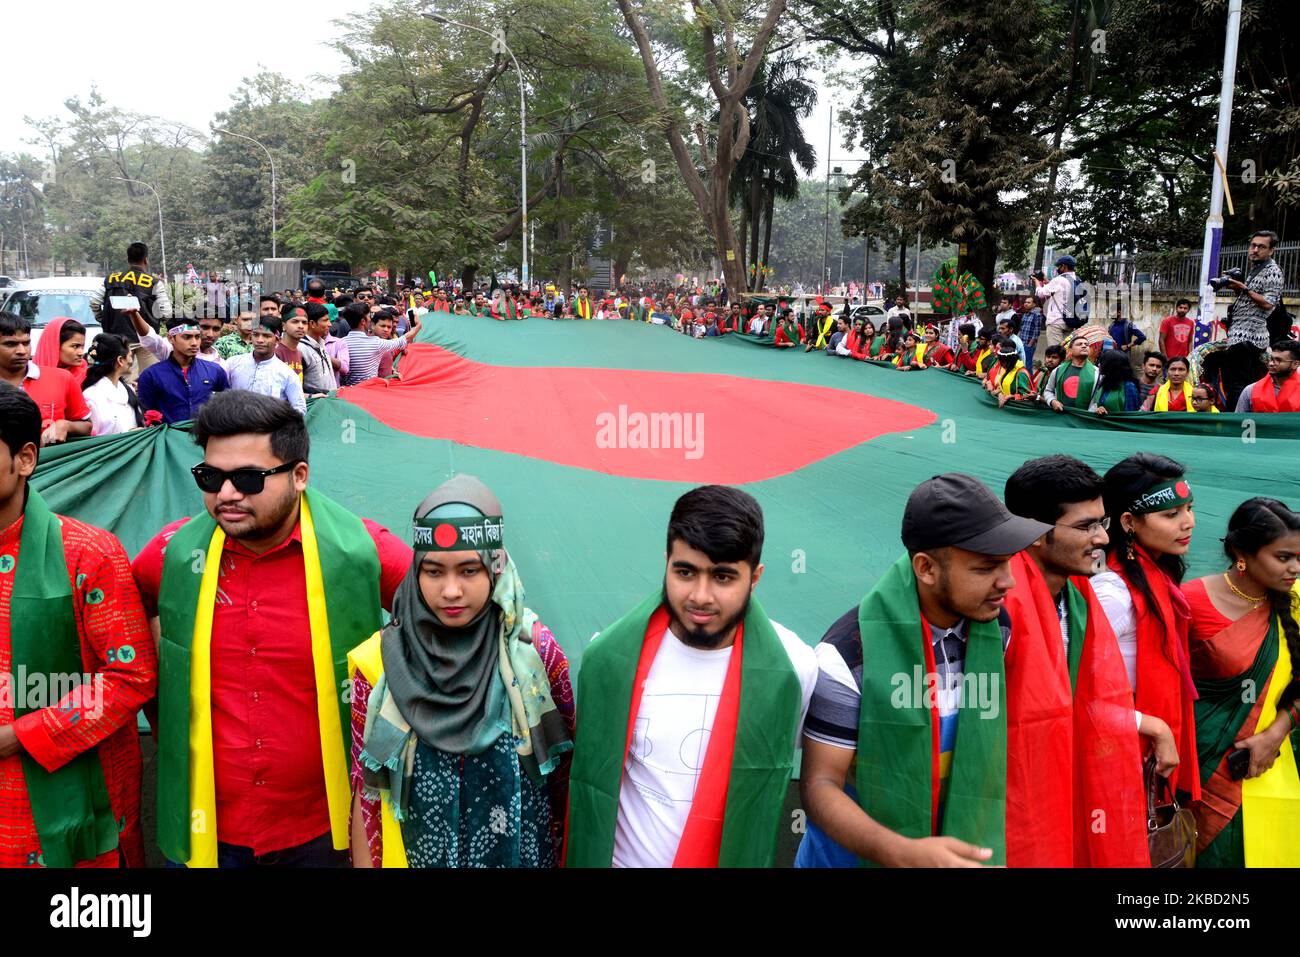 Bangladeshi people participate in a rally during the Victory Day celebrations in Dhaka, Bangladesh on December 16, 2019. Bangladesh marks its 48th Victory Day to commemorate the victory of the Allied forces High Command over the Pakistani forces in the Bangladesh Liberation War in 1971. Bangladesh became a free nation on 16 December 1971 after a nine-month bloody war with Pakistan. (Photo by Mamunur Rashid/NurPhoto) Stock Photo